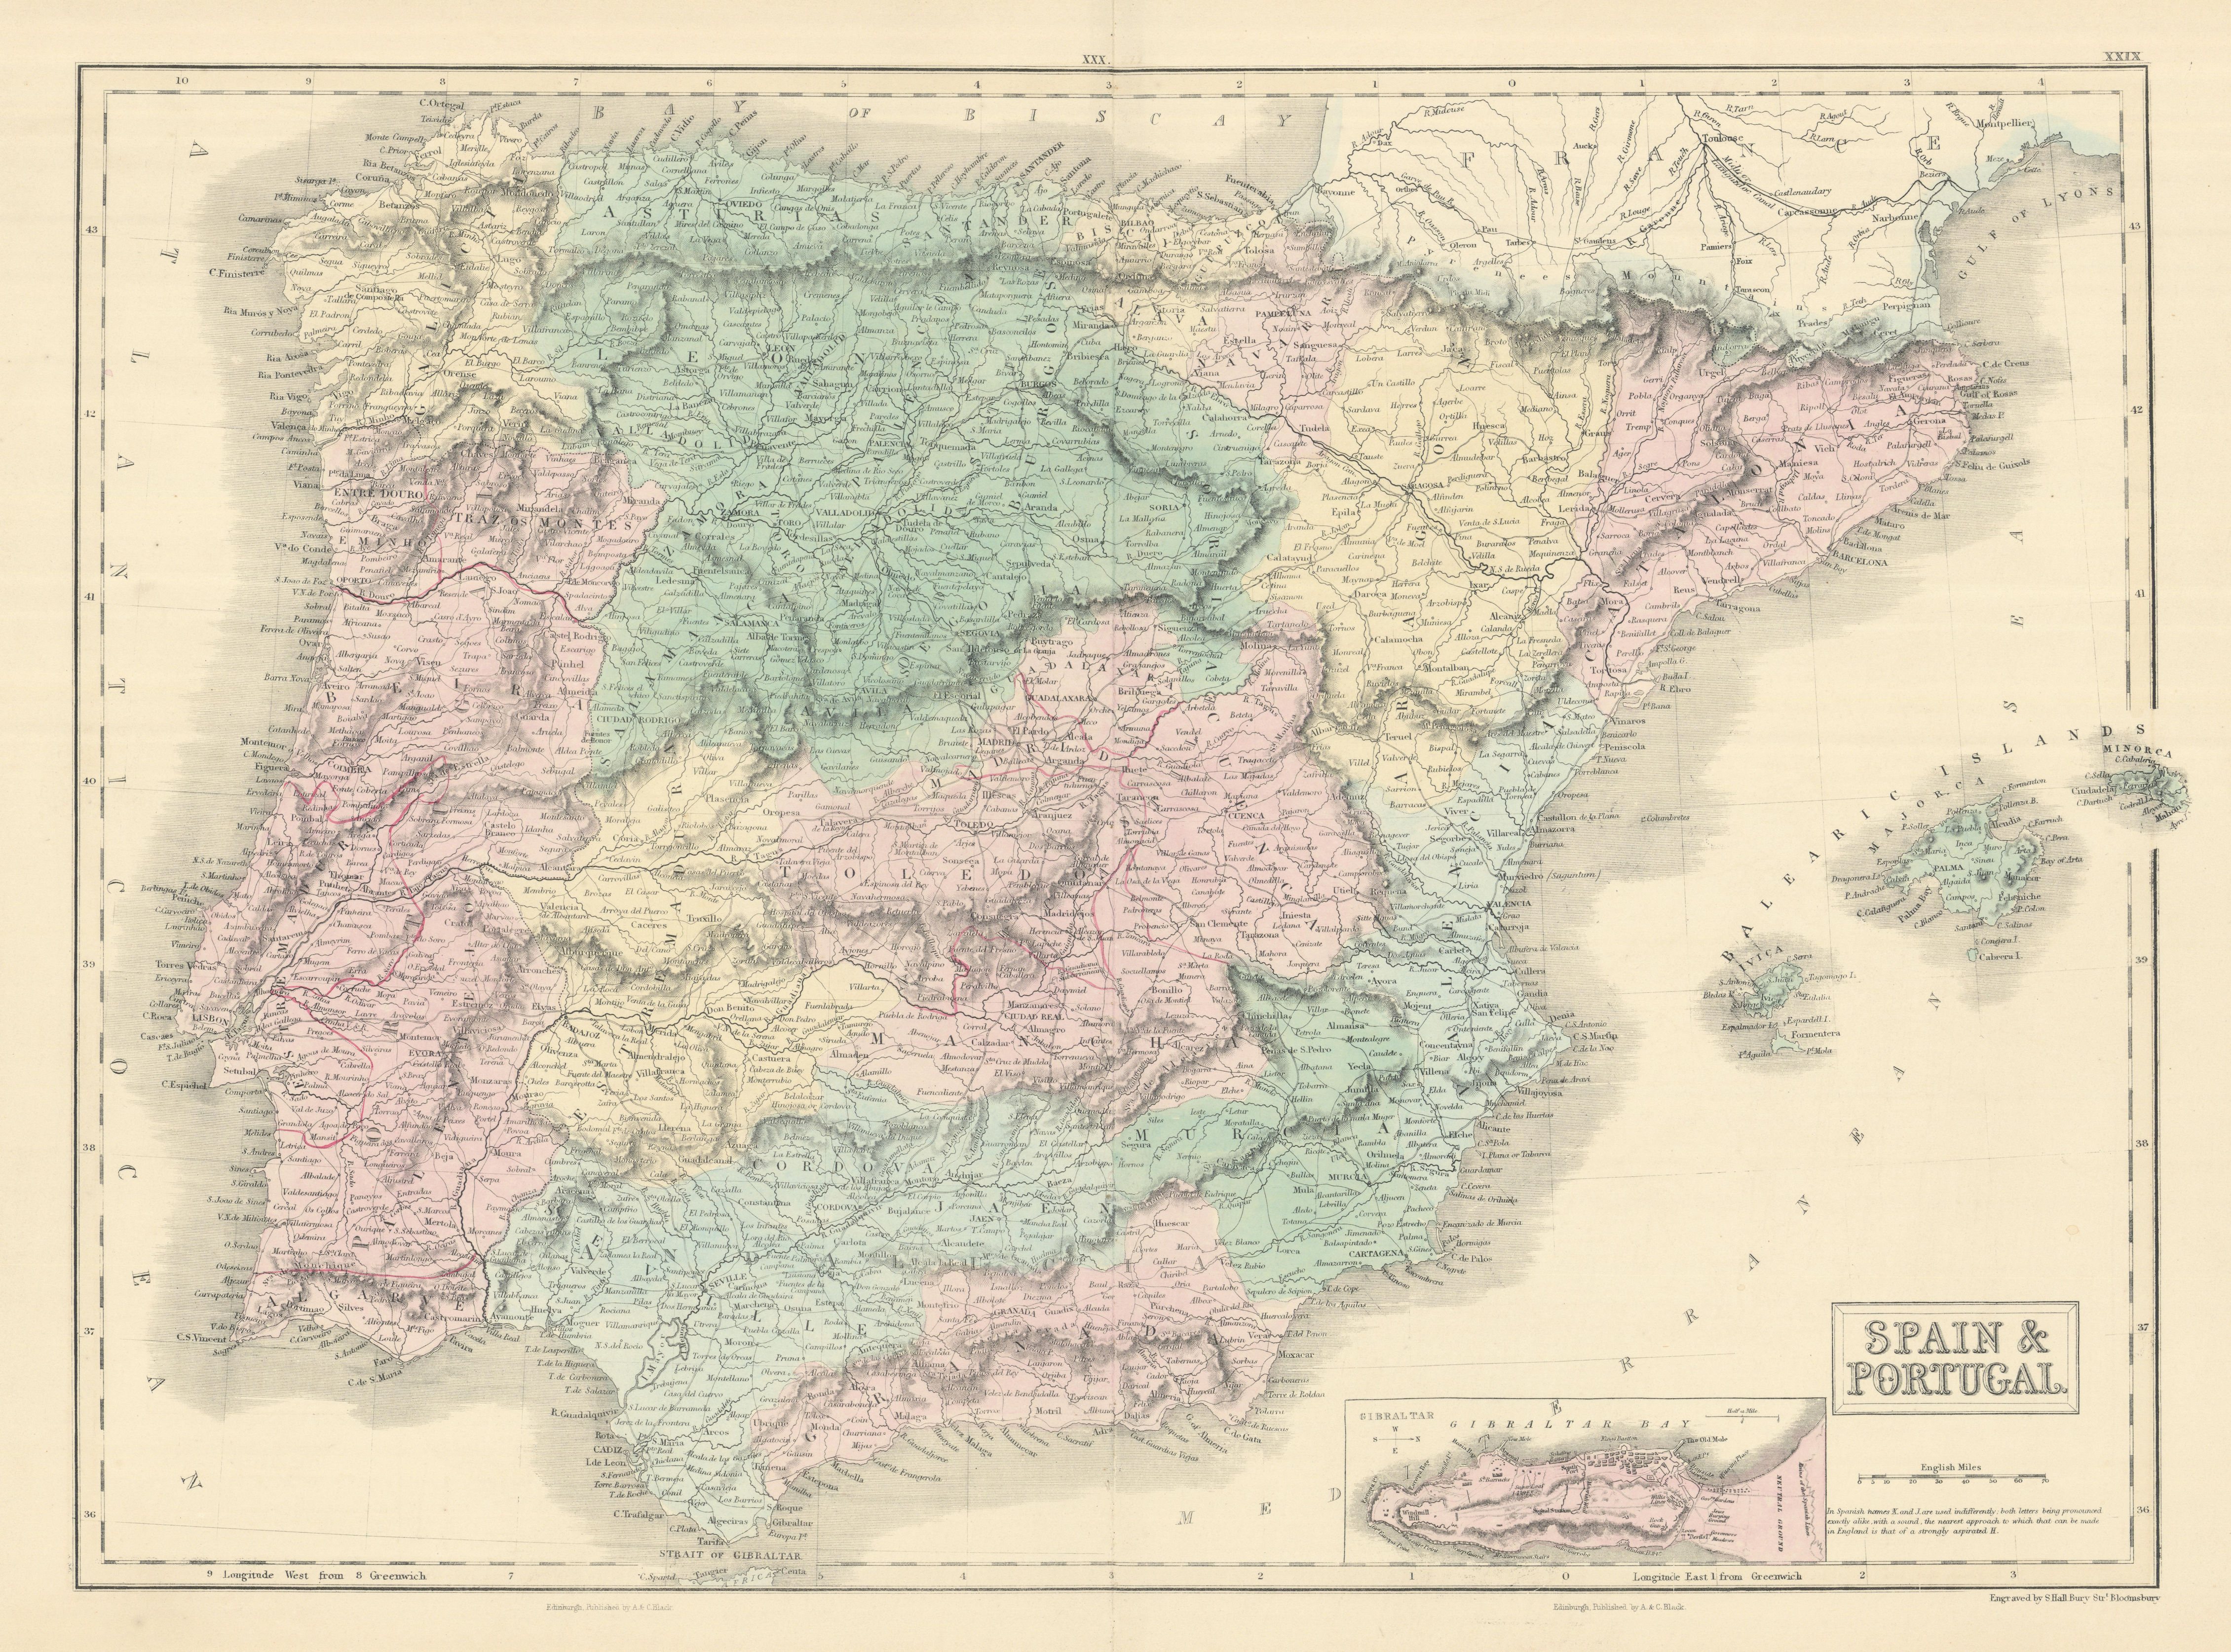 Associate Product Spain & Portugal. Inset Gibraltar. Iberia. SIDNEY HALL 1854 old antique map